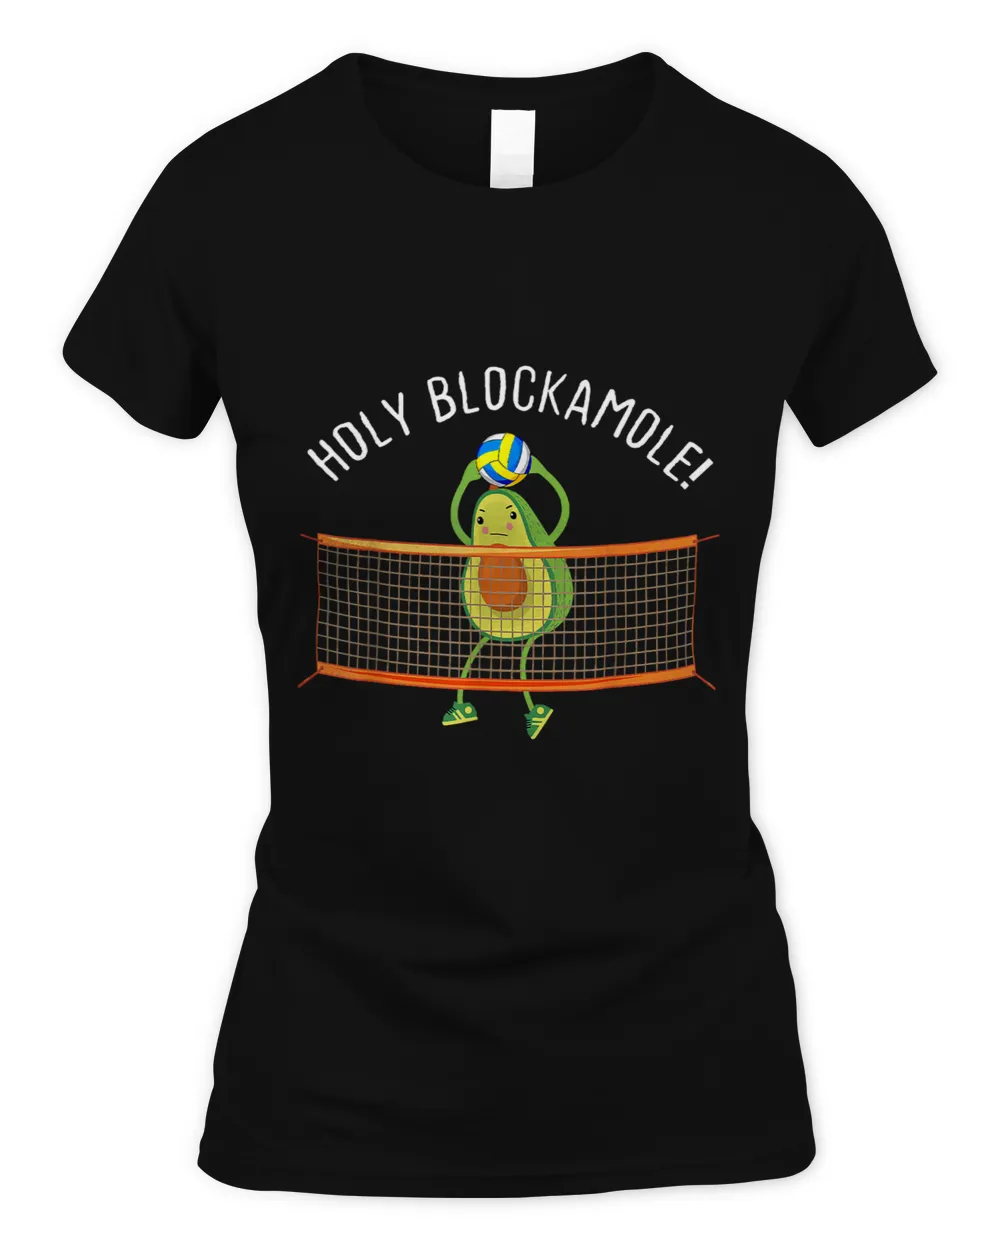 Holy Blockamole Volleyball Cute Funny Men Women Outfit